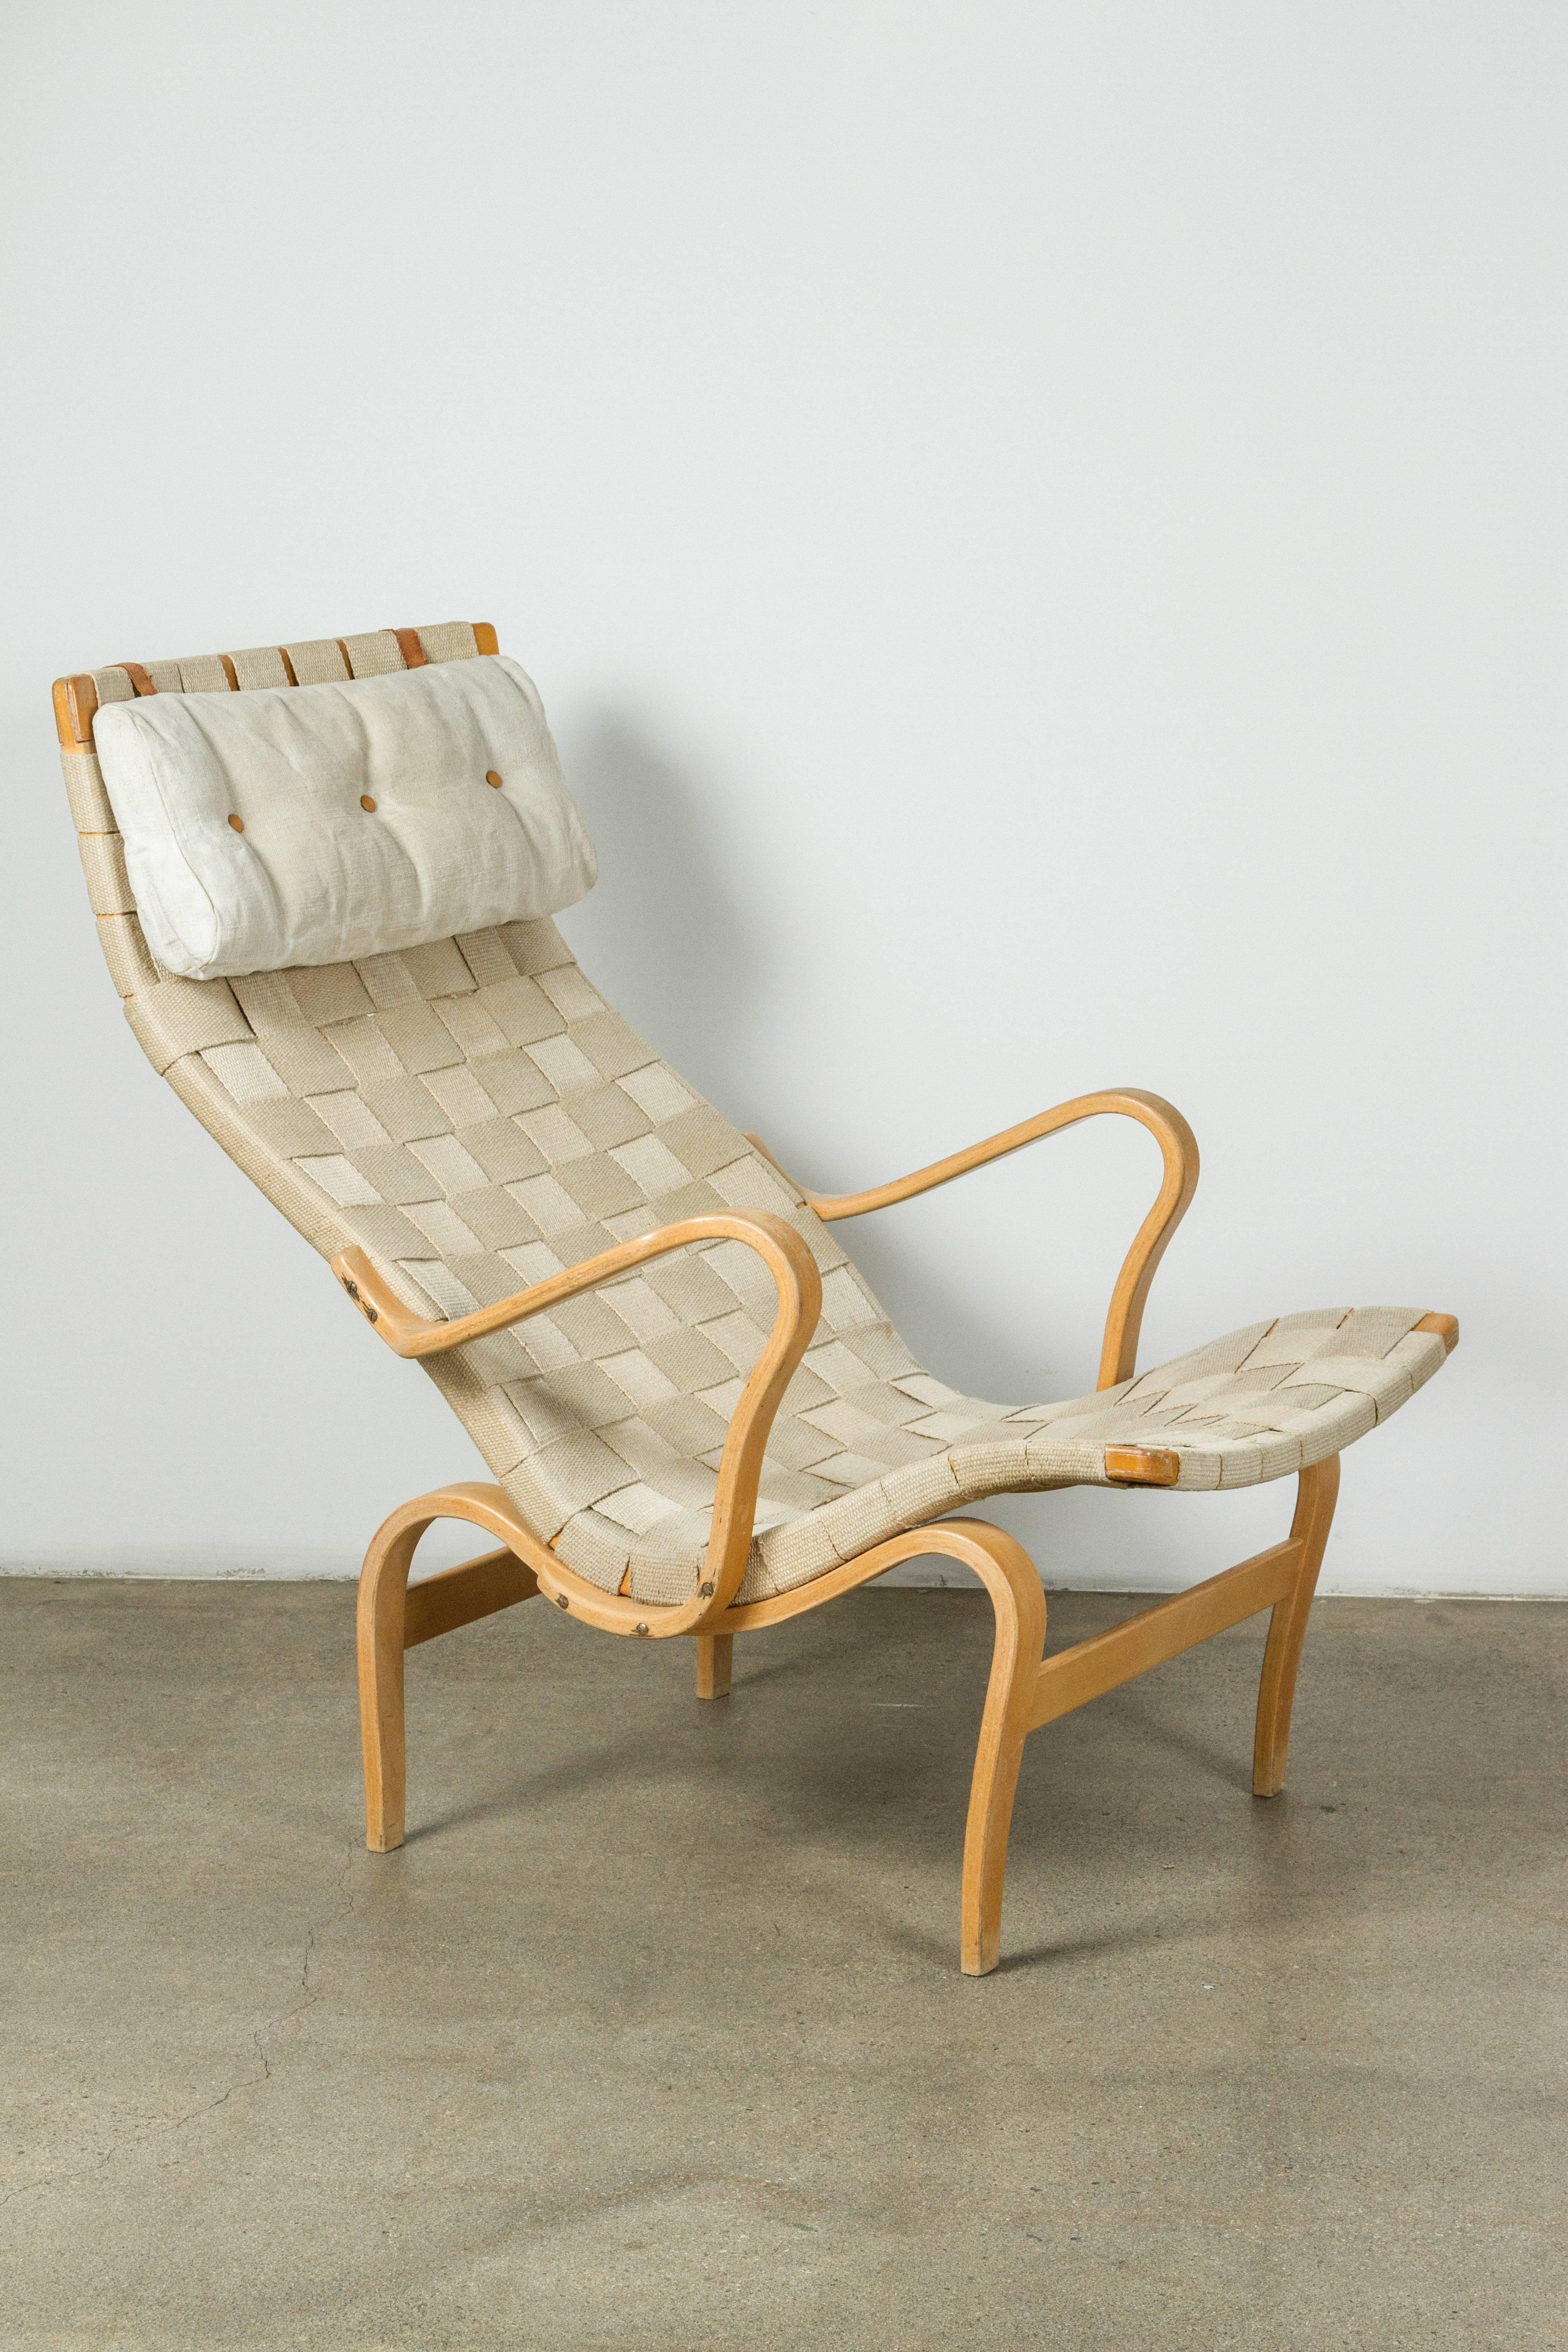 Canvas and bent beechwood Pernilla chair with ottoman by Bruno Mathsson for DUX, made in Sweden, circa 1970s.

Ottoman measures: 20.5 W x 26 D x 16 H inches.